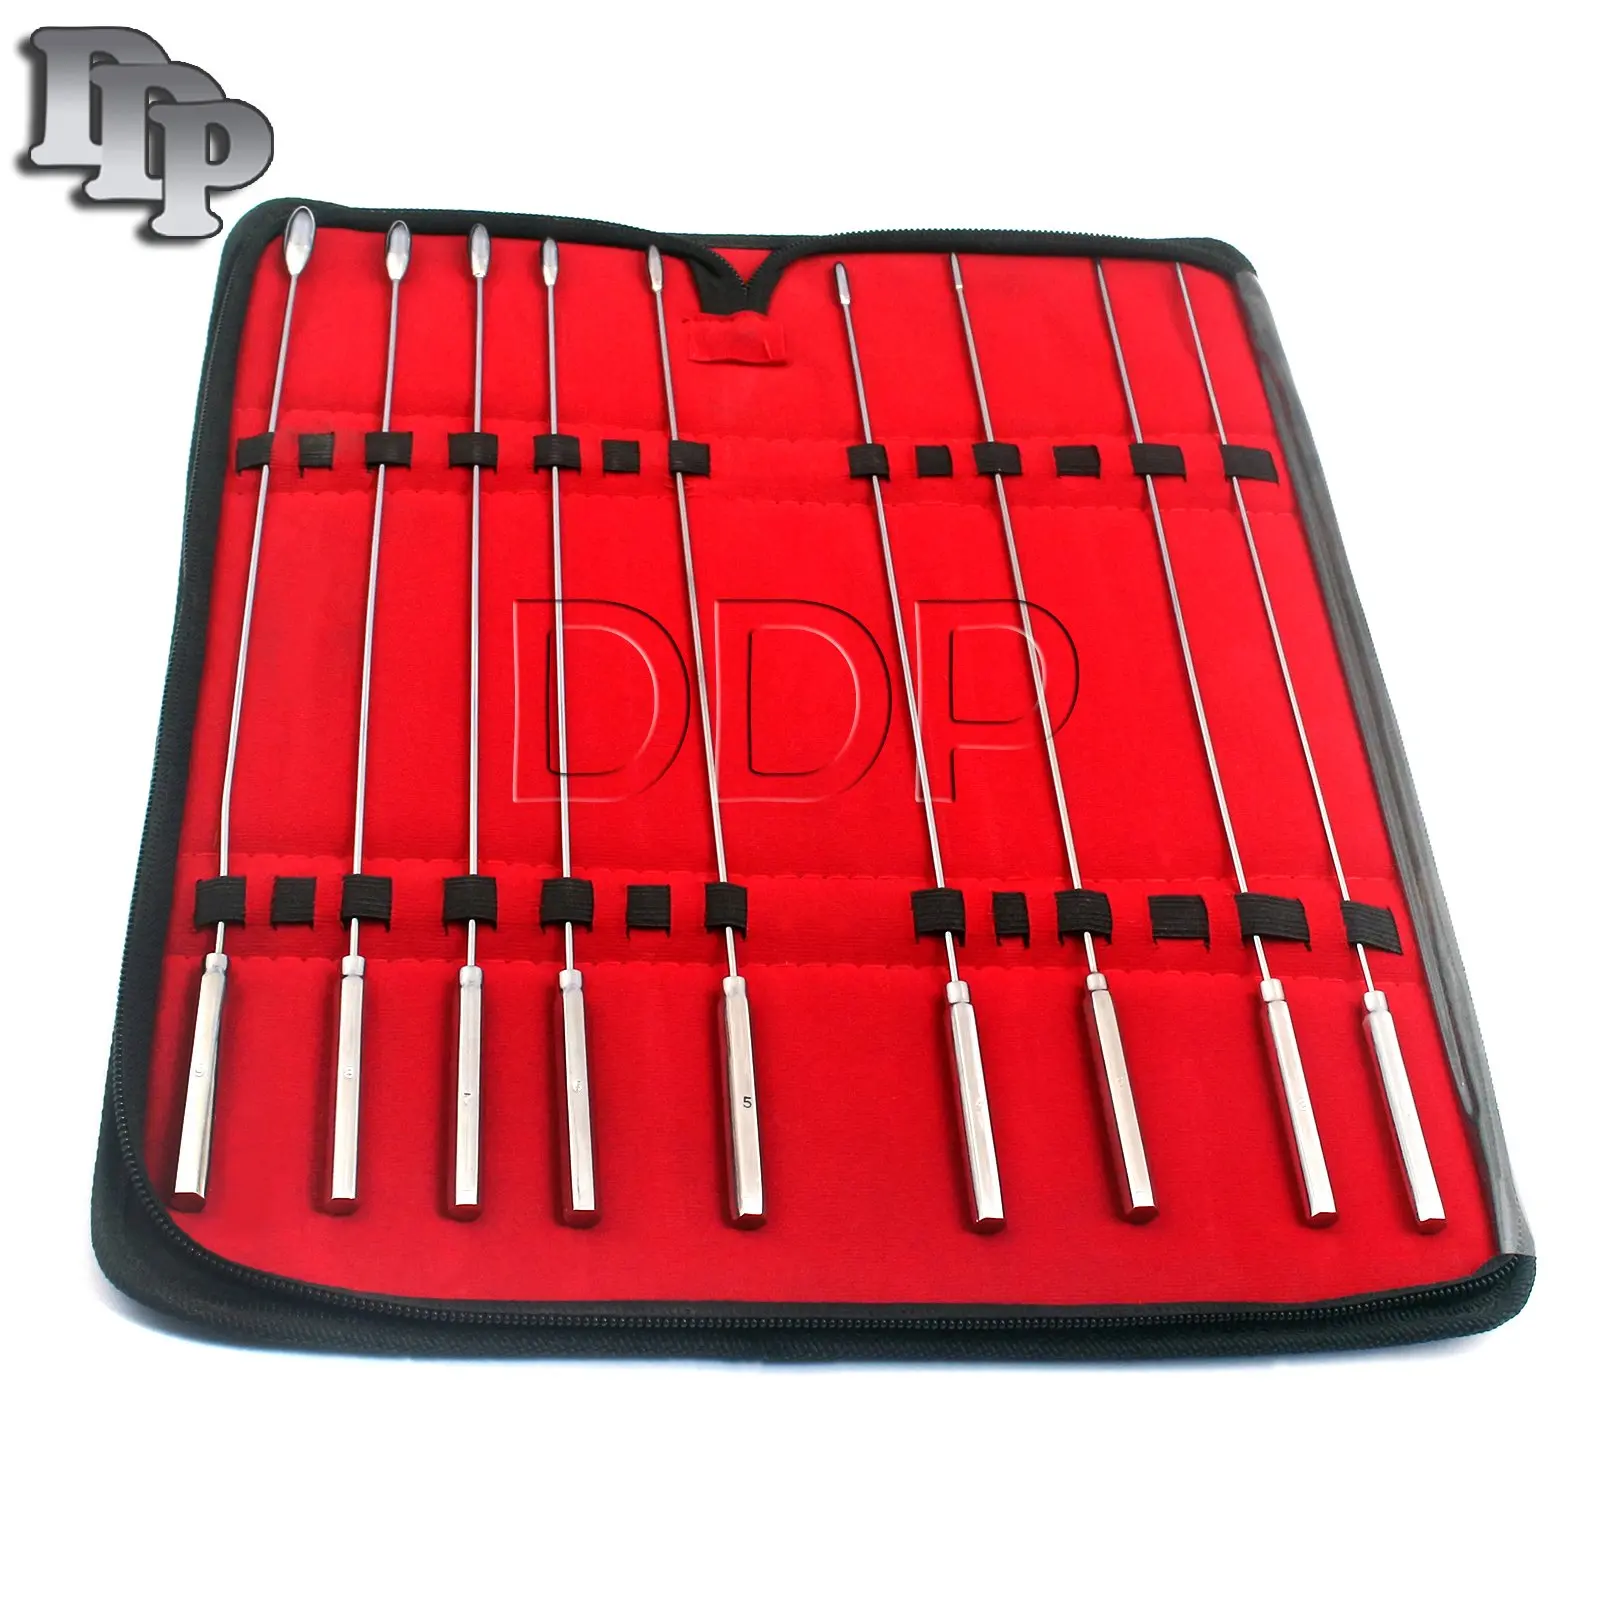 Ddp bakes rosebud sounds dilator set of 9 pieces stainless steel.